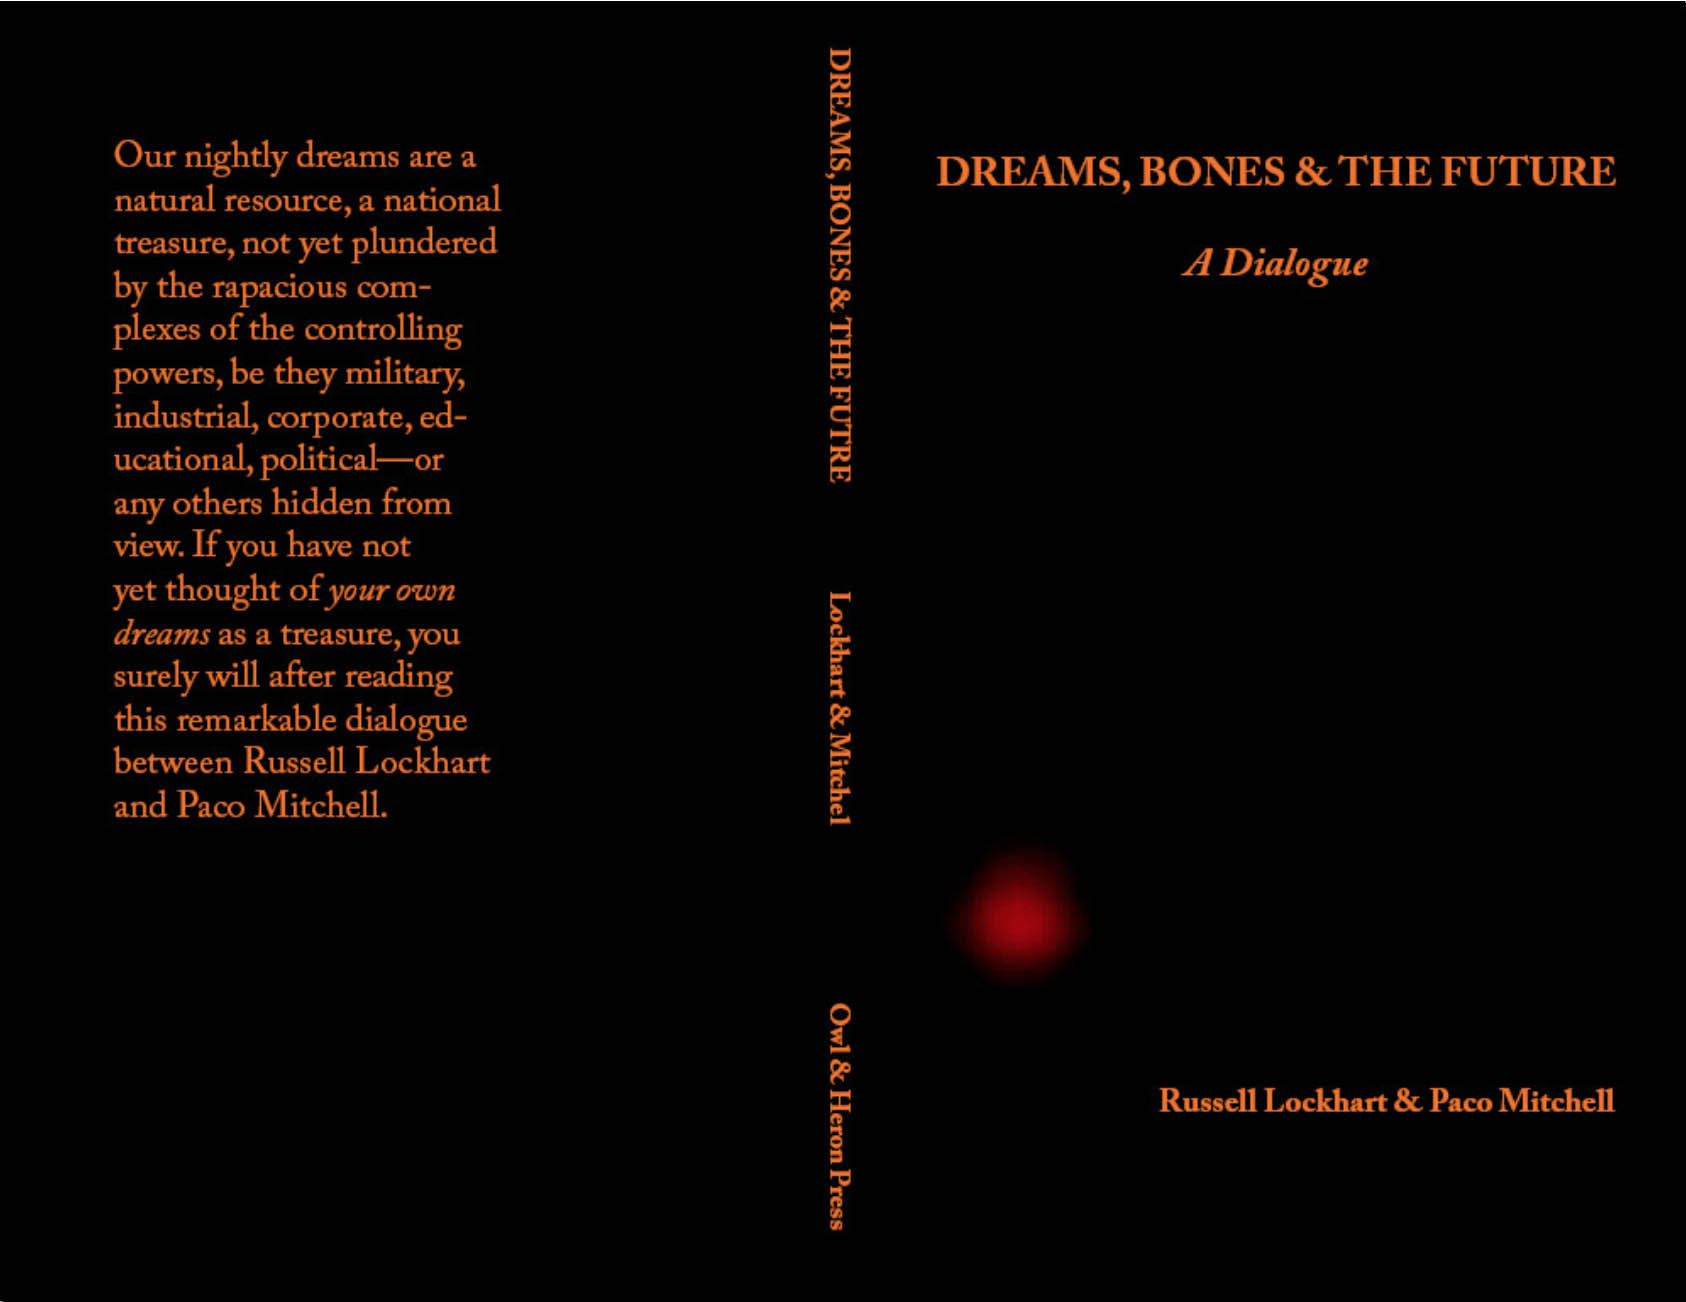 Cover of Dreams, Bones and the Future, by Russell Lockhart and Paco Mitchell